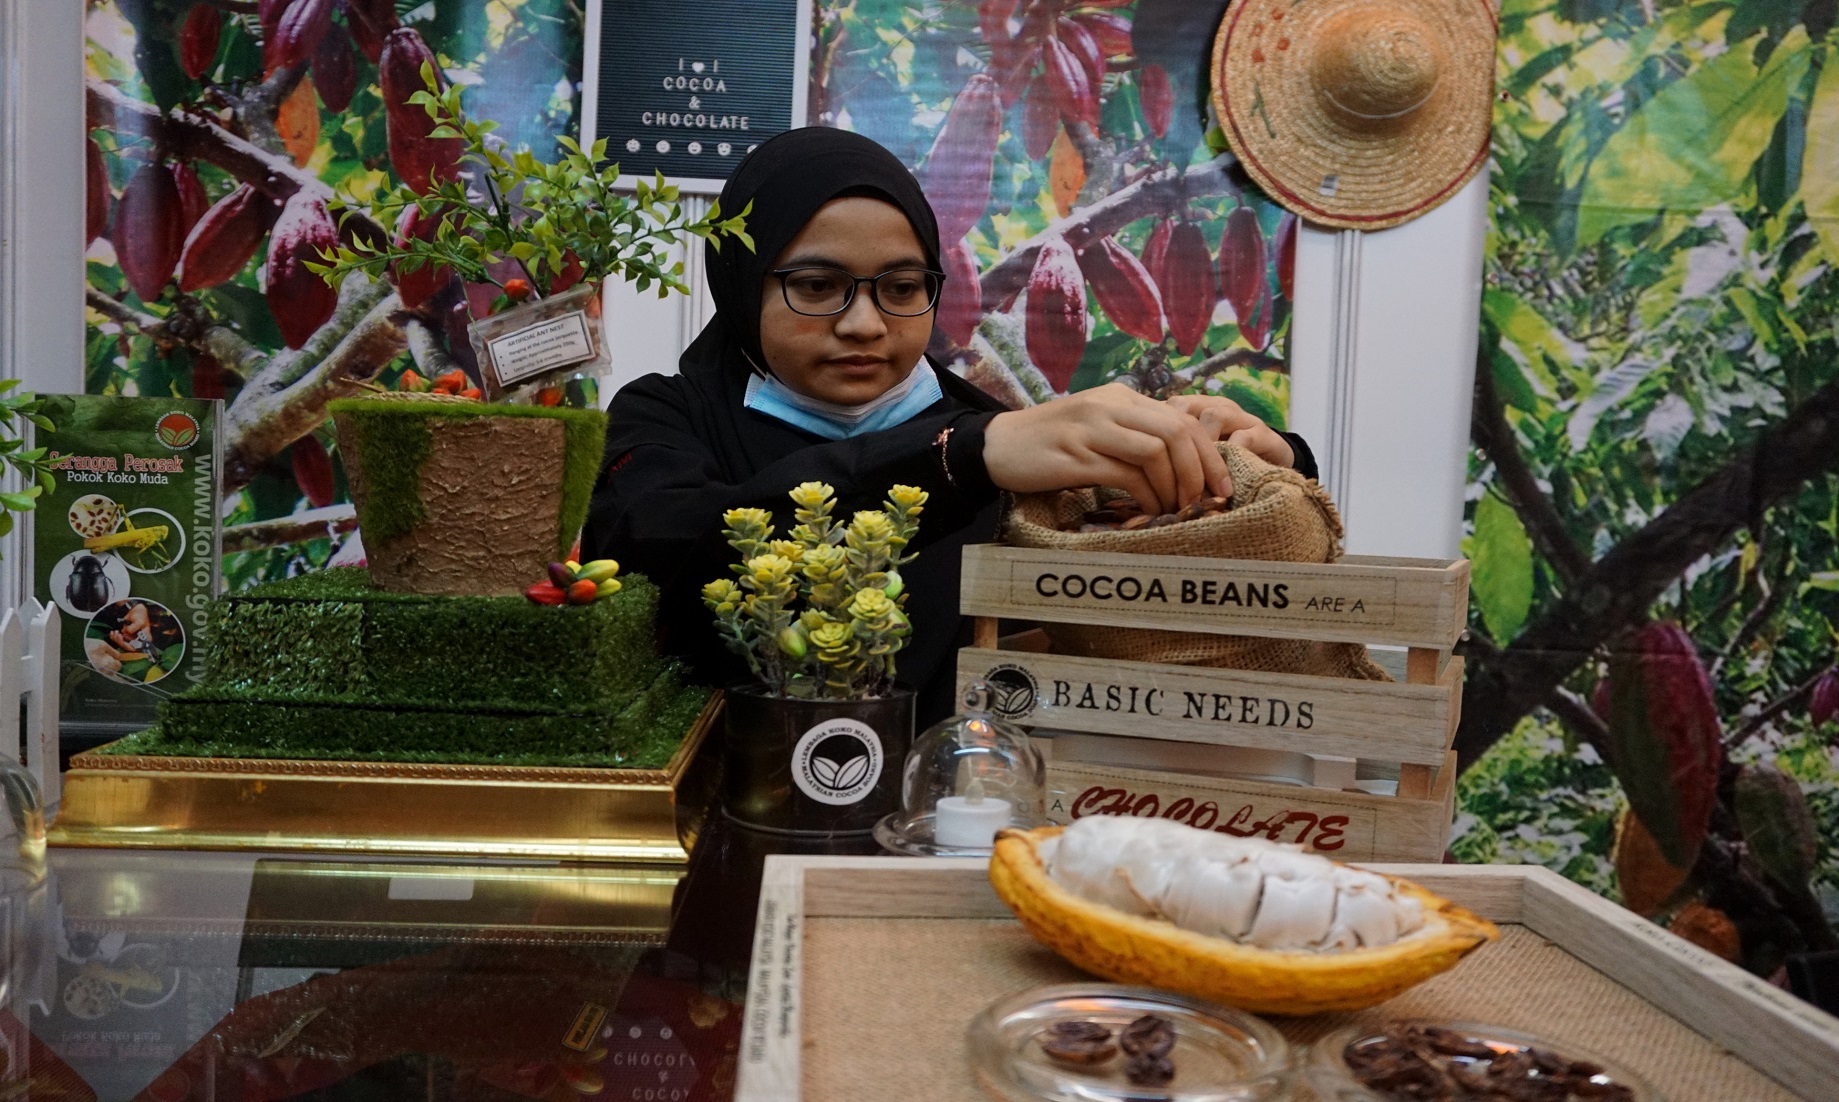 5 local chocolate brands to enter international market by 2025